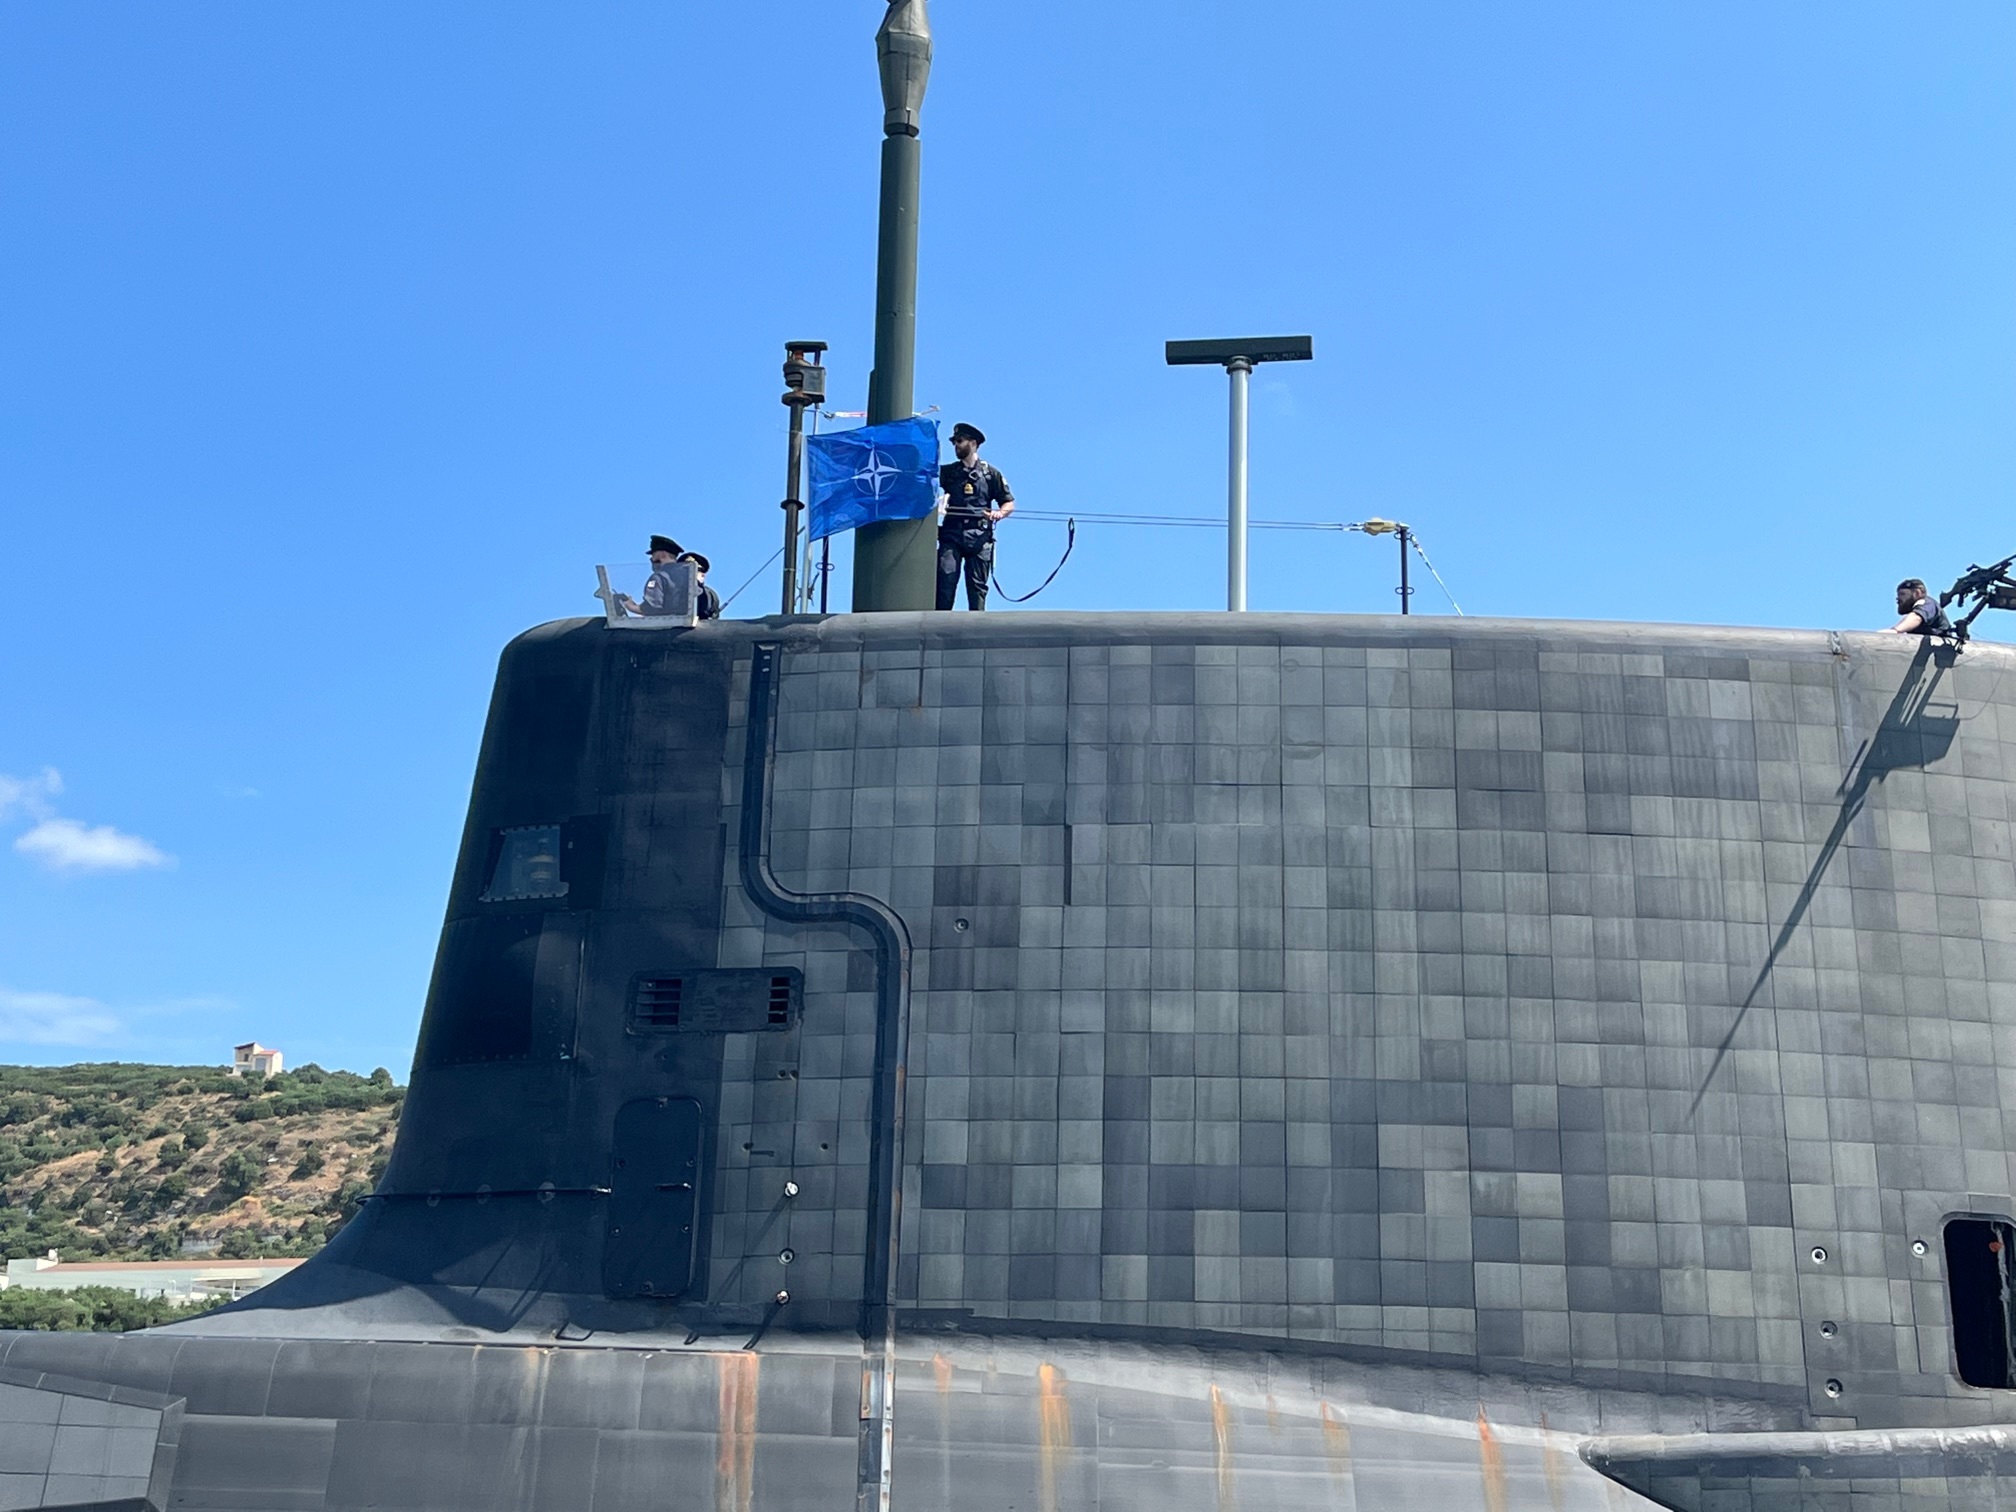 HMS Audacious departs Souda Bay in Crete ahead of NATO training and operations in the Mediterranean. The Astute-class submarine was on her first operational deployment from January 2022. Audacious can be seen flying the NATO pennant on her departure from